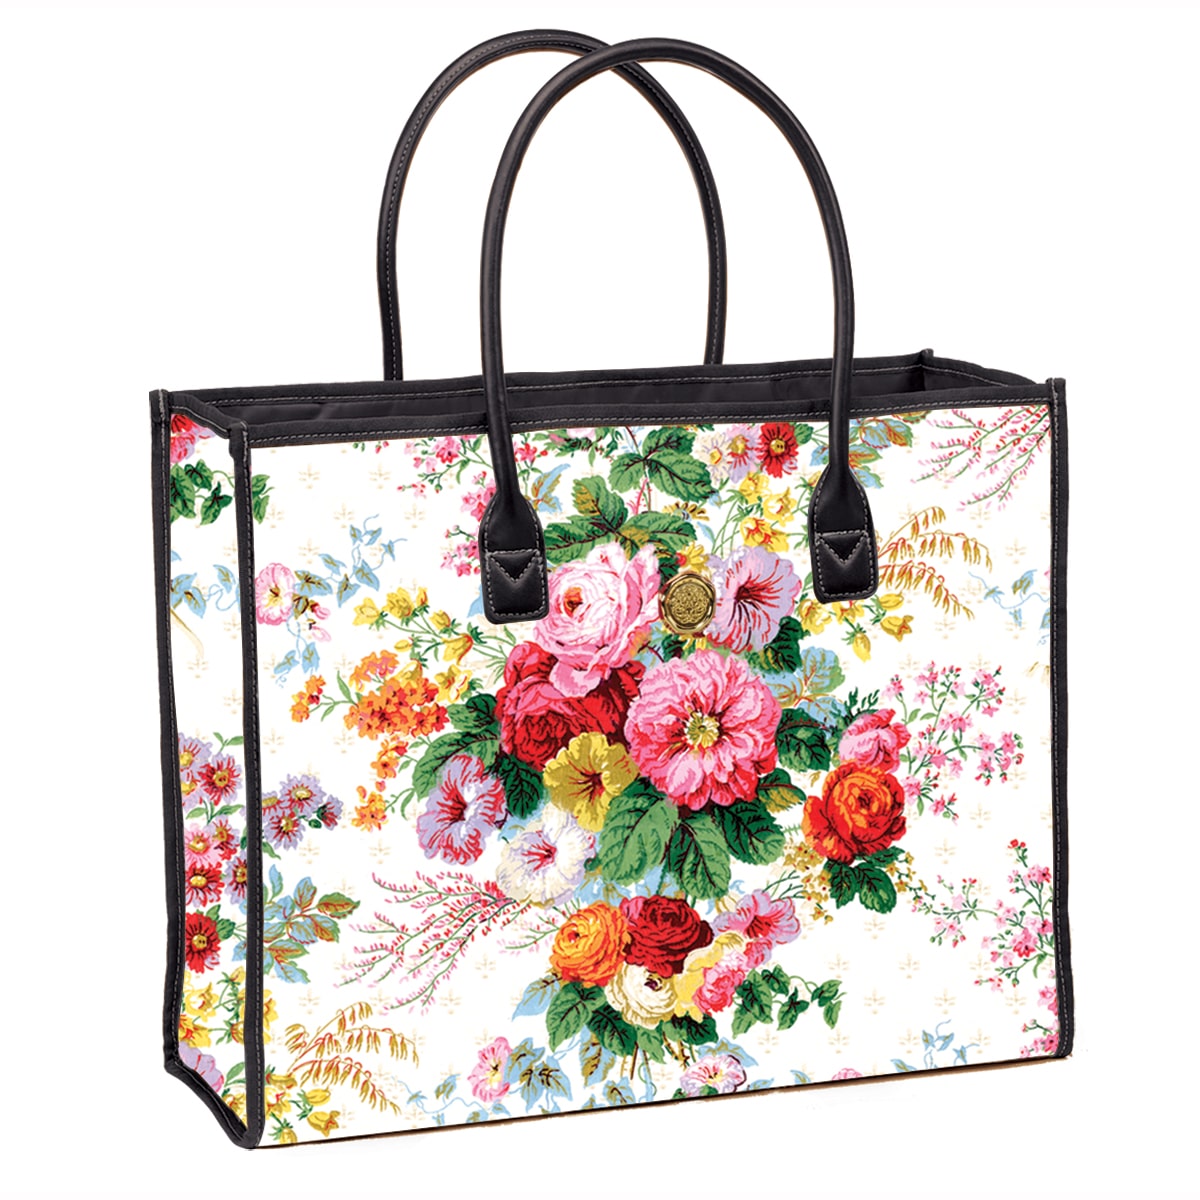 An Annalise Tote Bag with flowers on it.